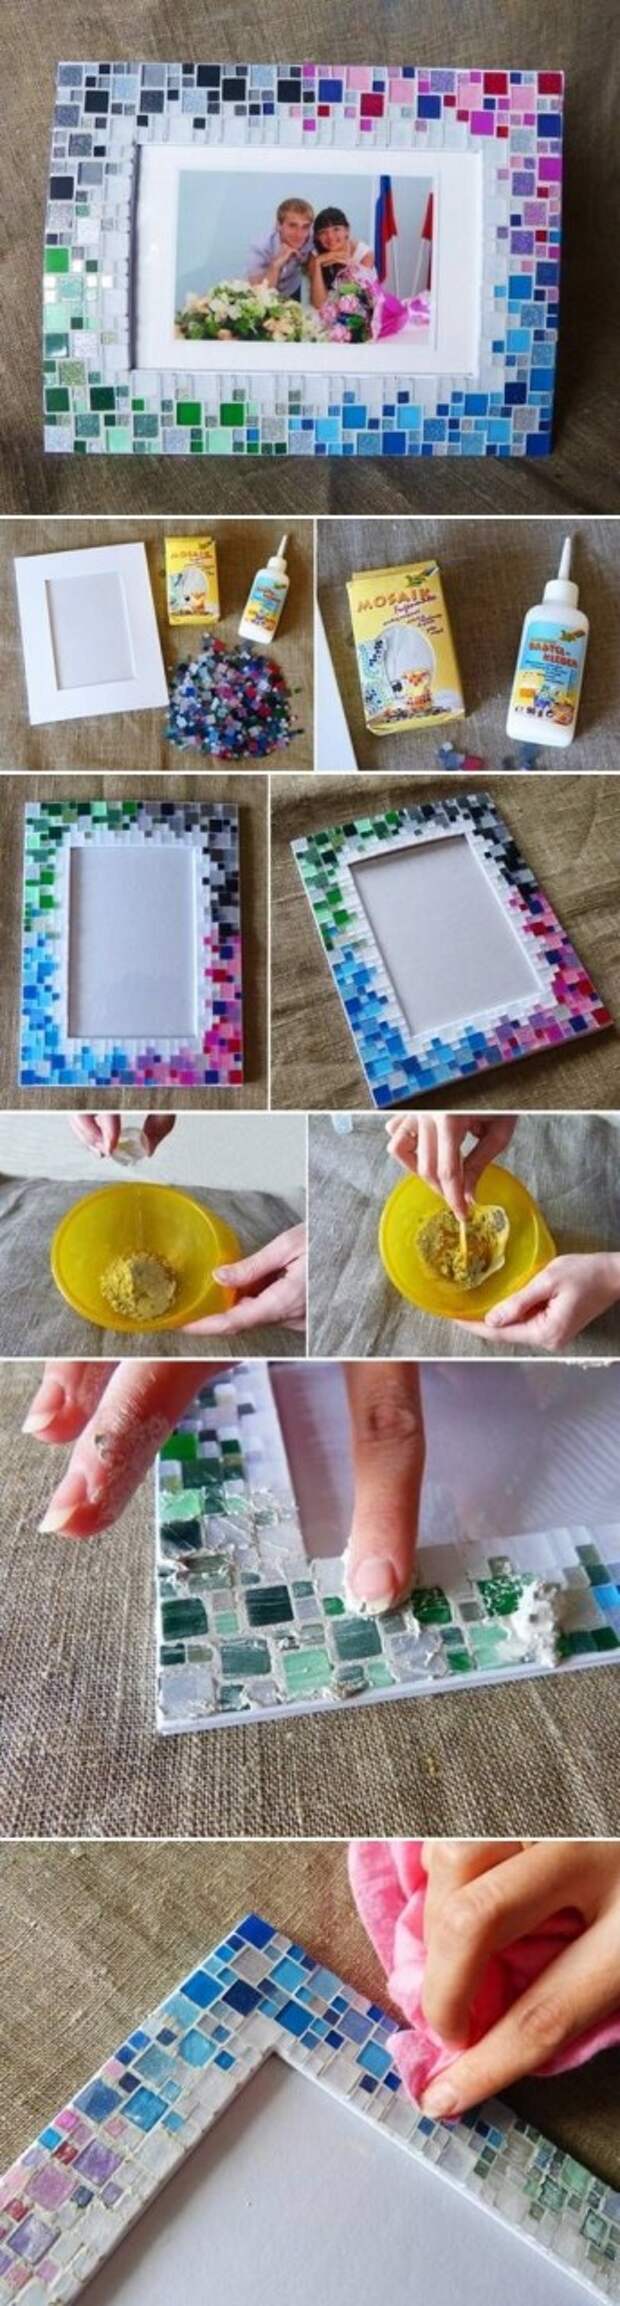 DIY Colorful Mosaic Picture Frame Pictures, Photos, and Images for Facebook, Tumblr, Pinterest, and Twitter